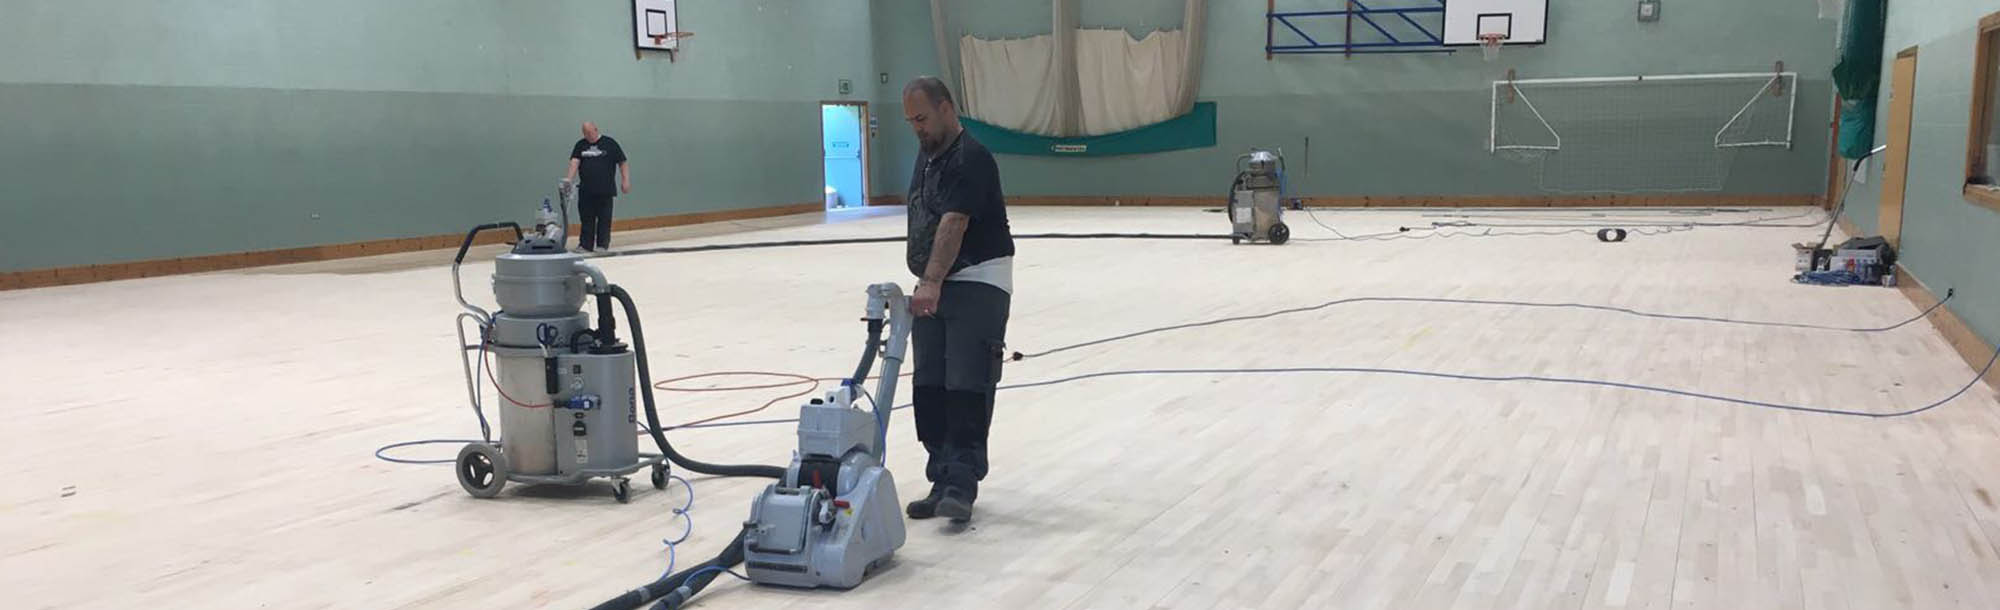 Indoor sports floor leisure centre maintenance and cleaning